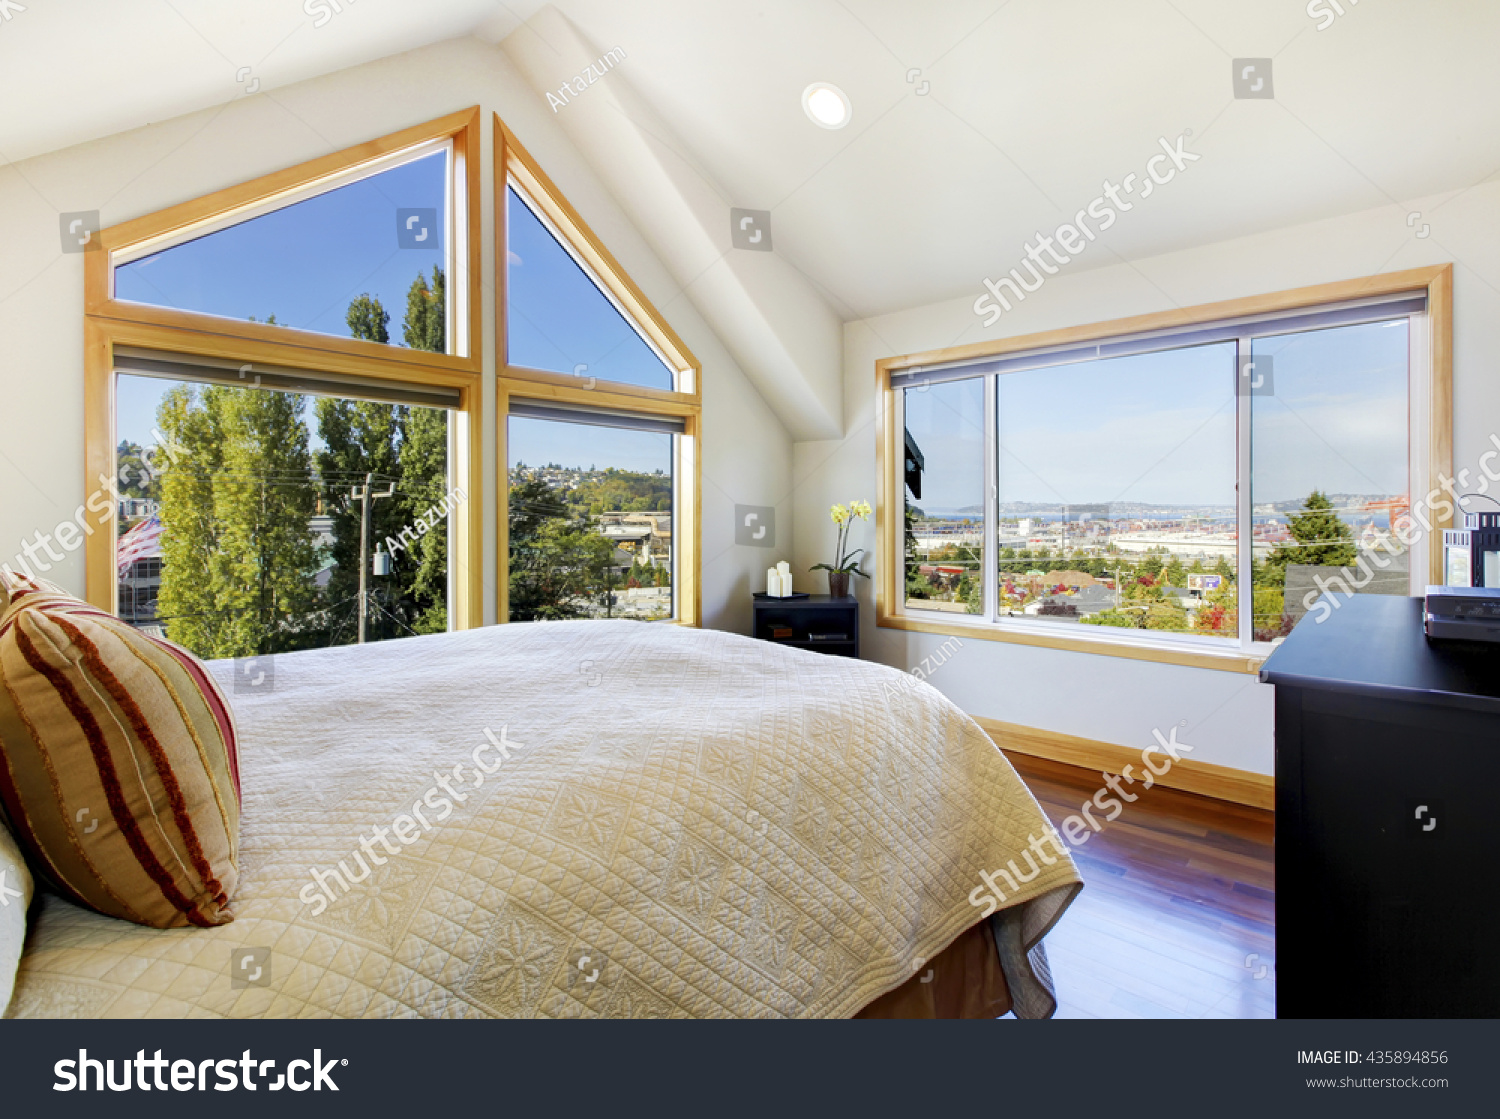 Stock Photo Shiny And Bright Bedroom With Vaulted Ceiling And Beautiful View 435894856 